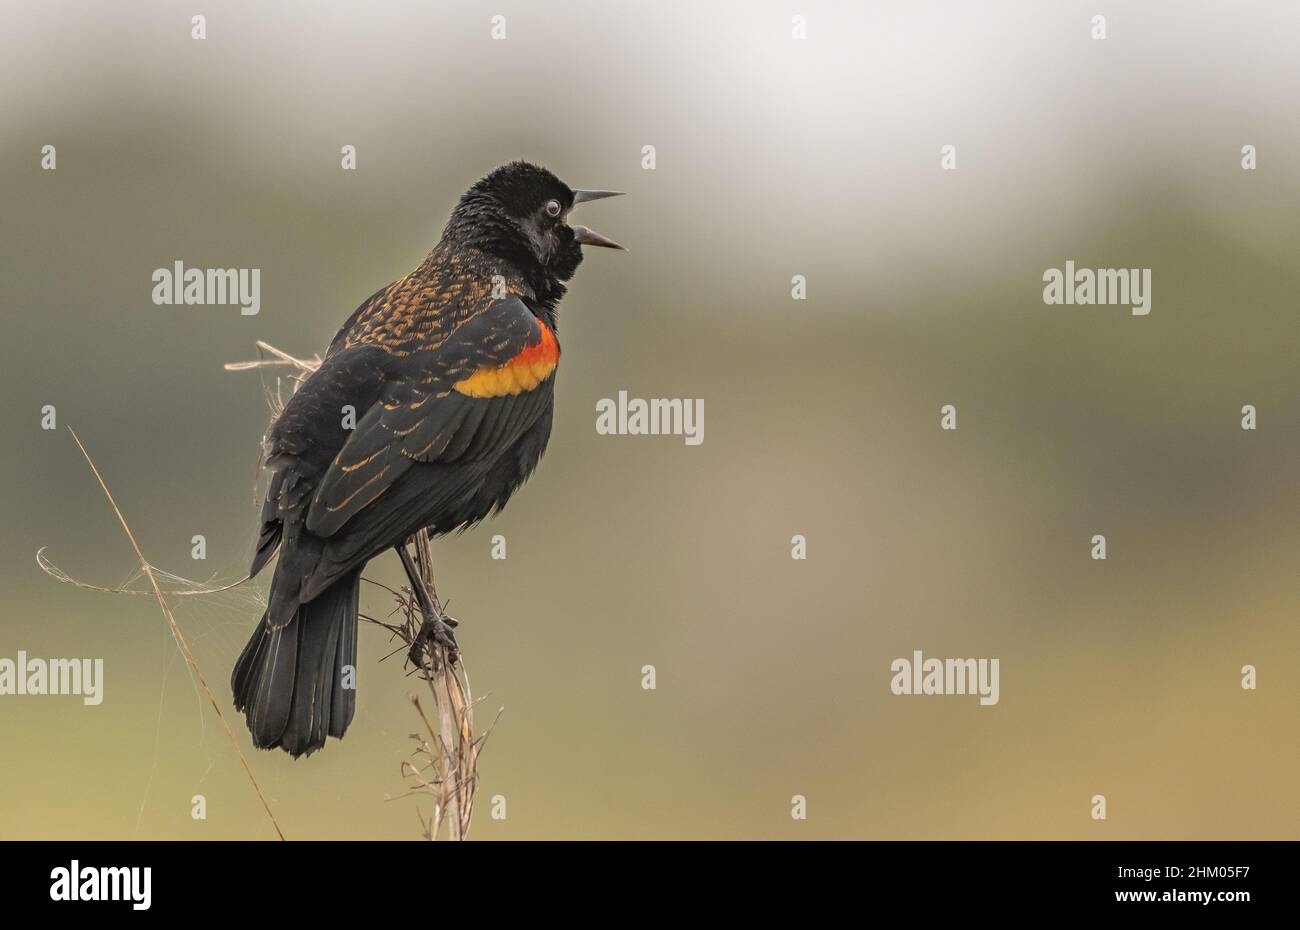 Red-shouldered blackbird perched on a wooden twig on a blurred background Stock Photo